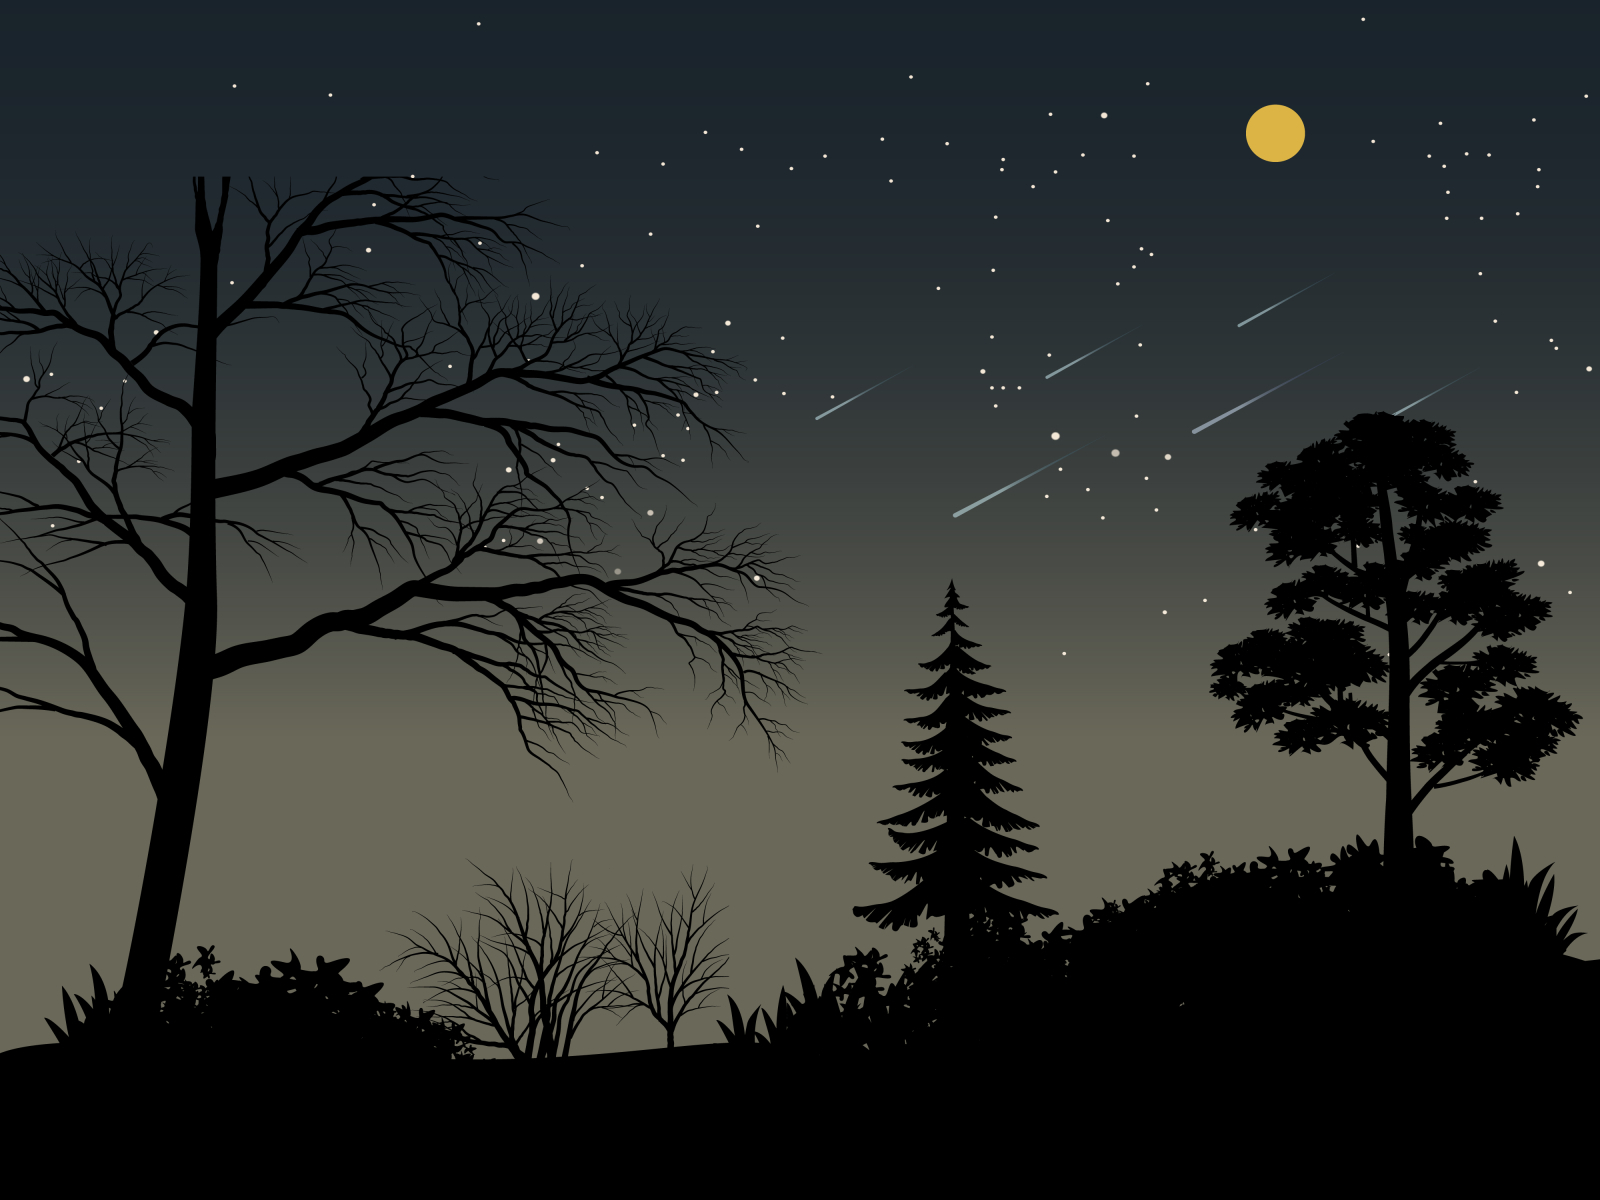 The moonlit Night || Landscape Art by Easterly Dobey on Dribbble